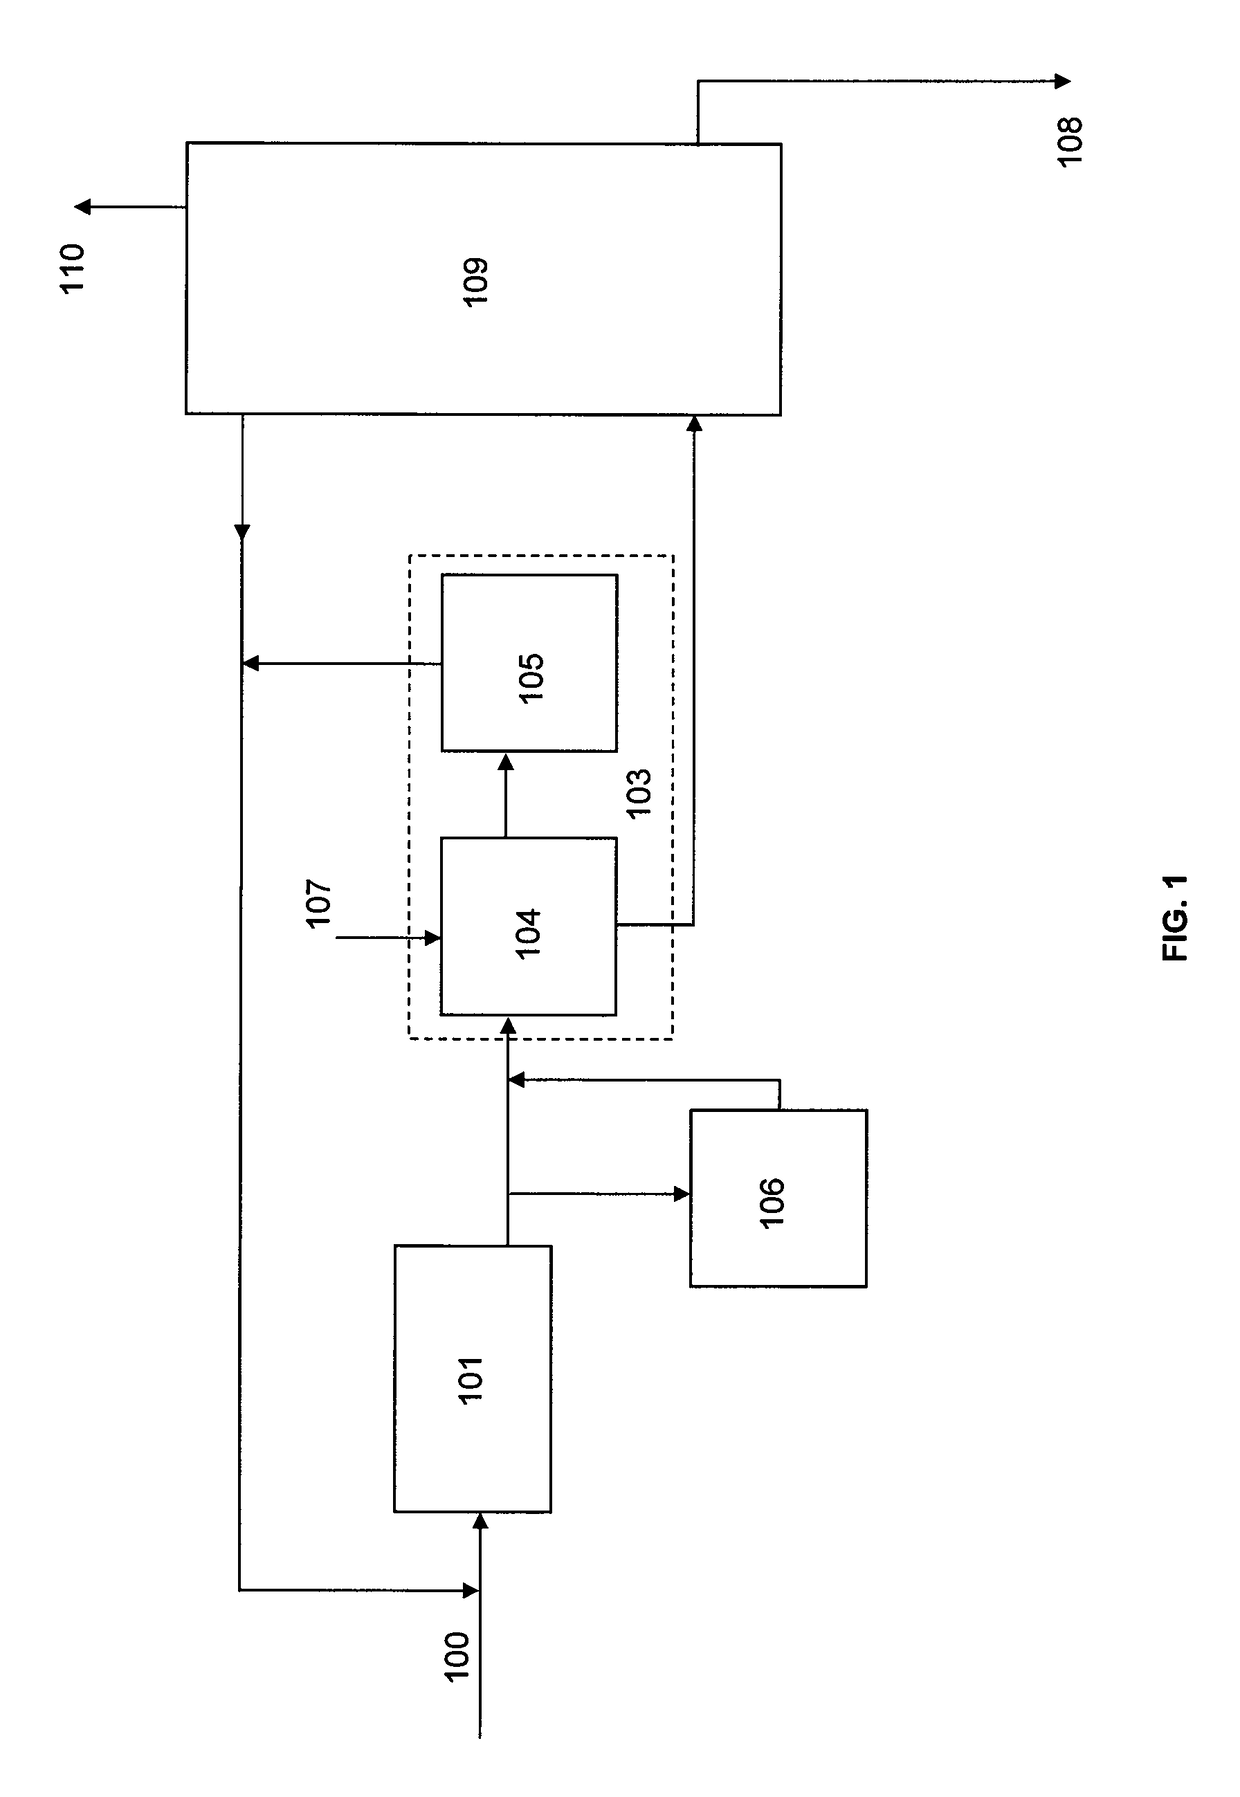 Method for producing a high purity trisilane product from the pyrolysis of disilane